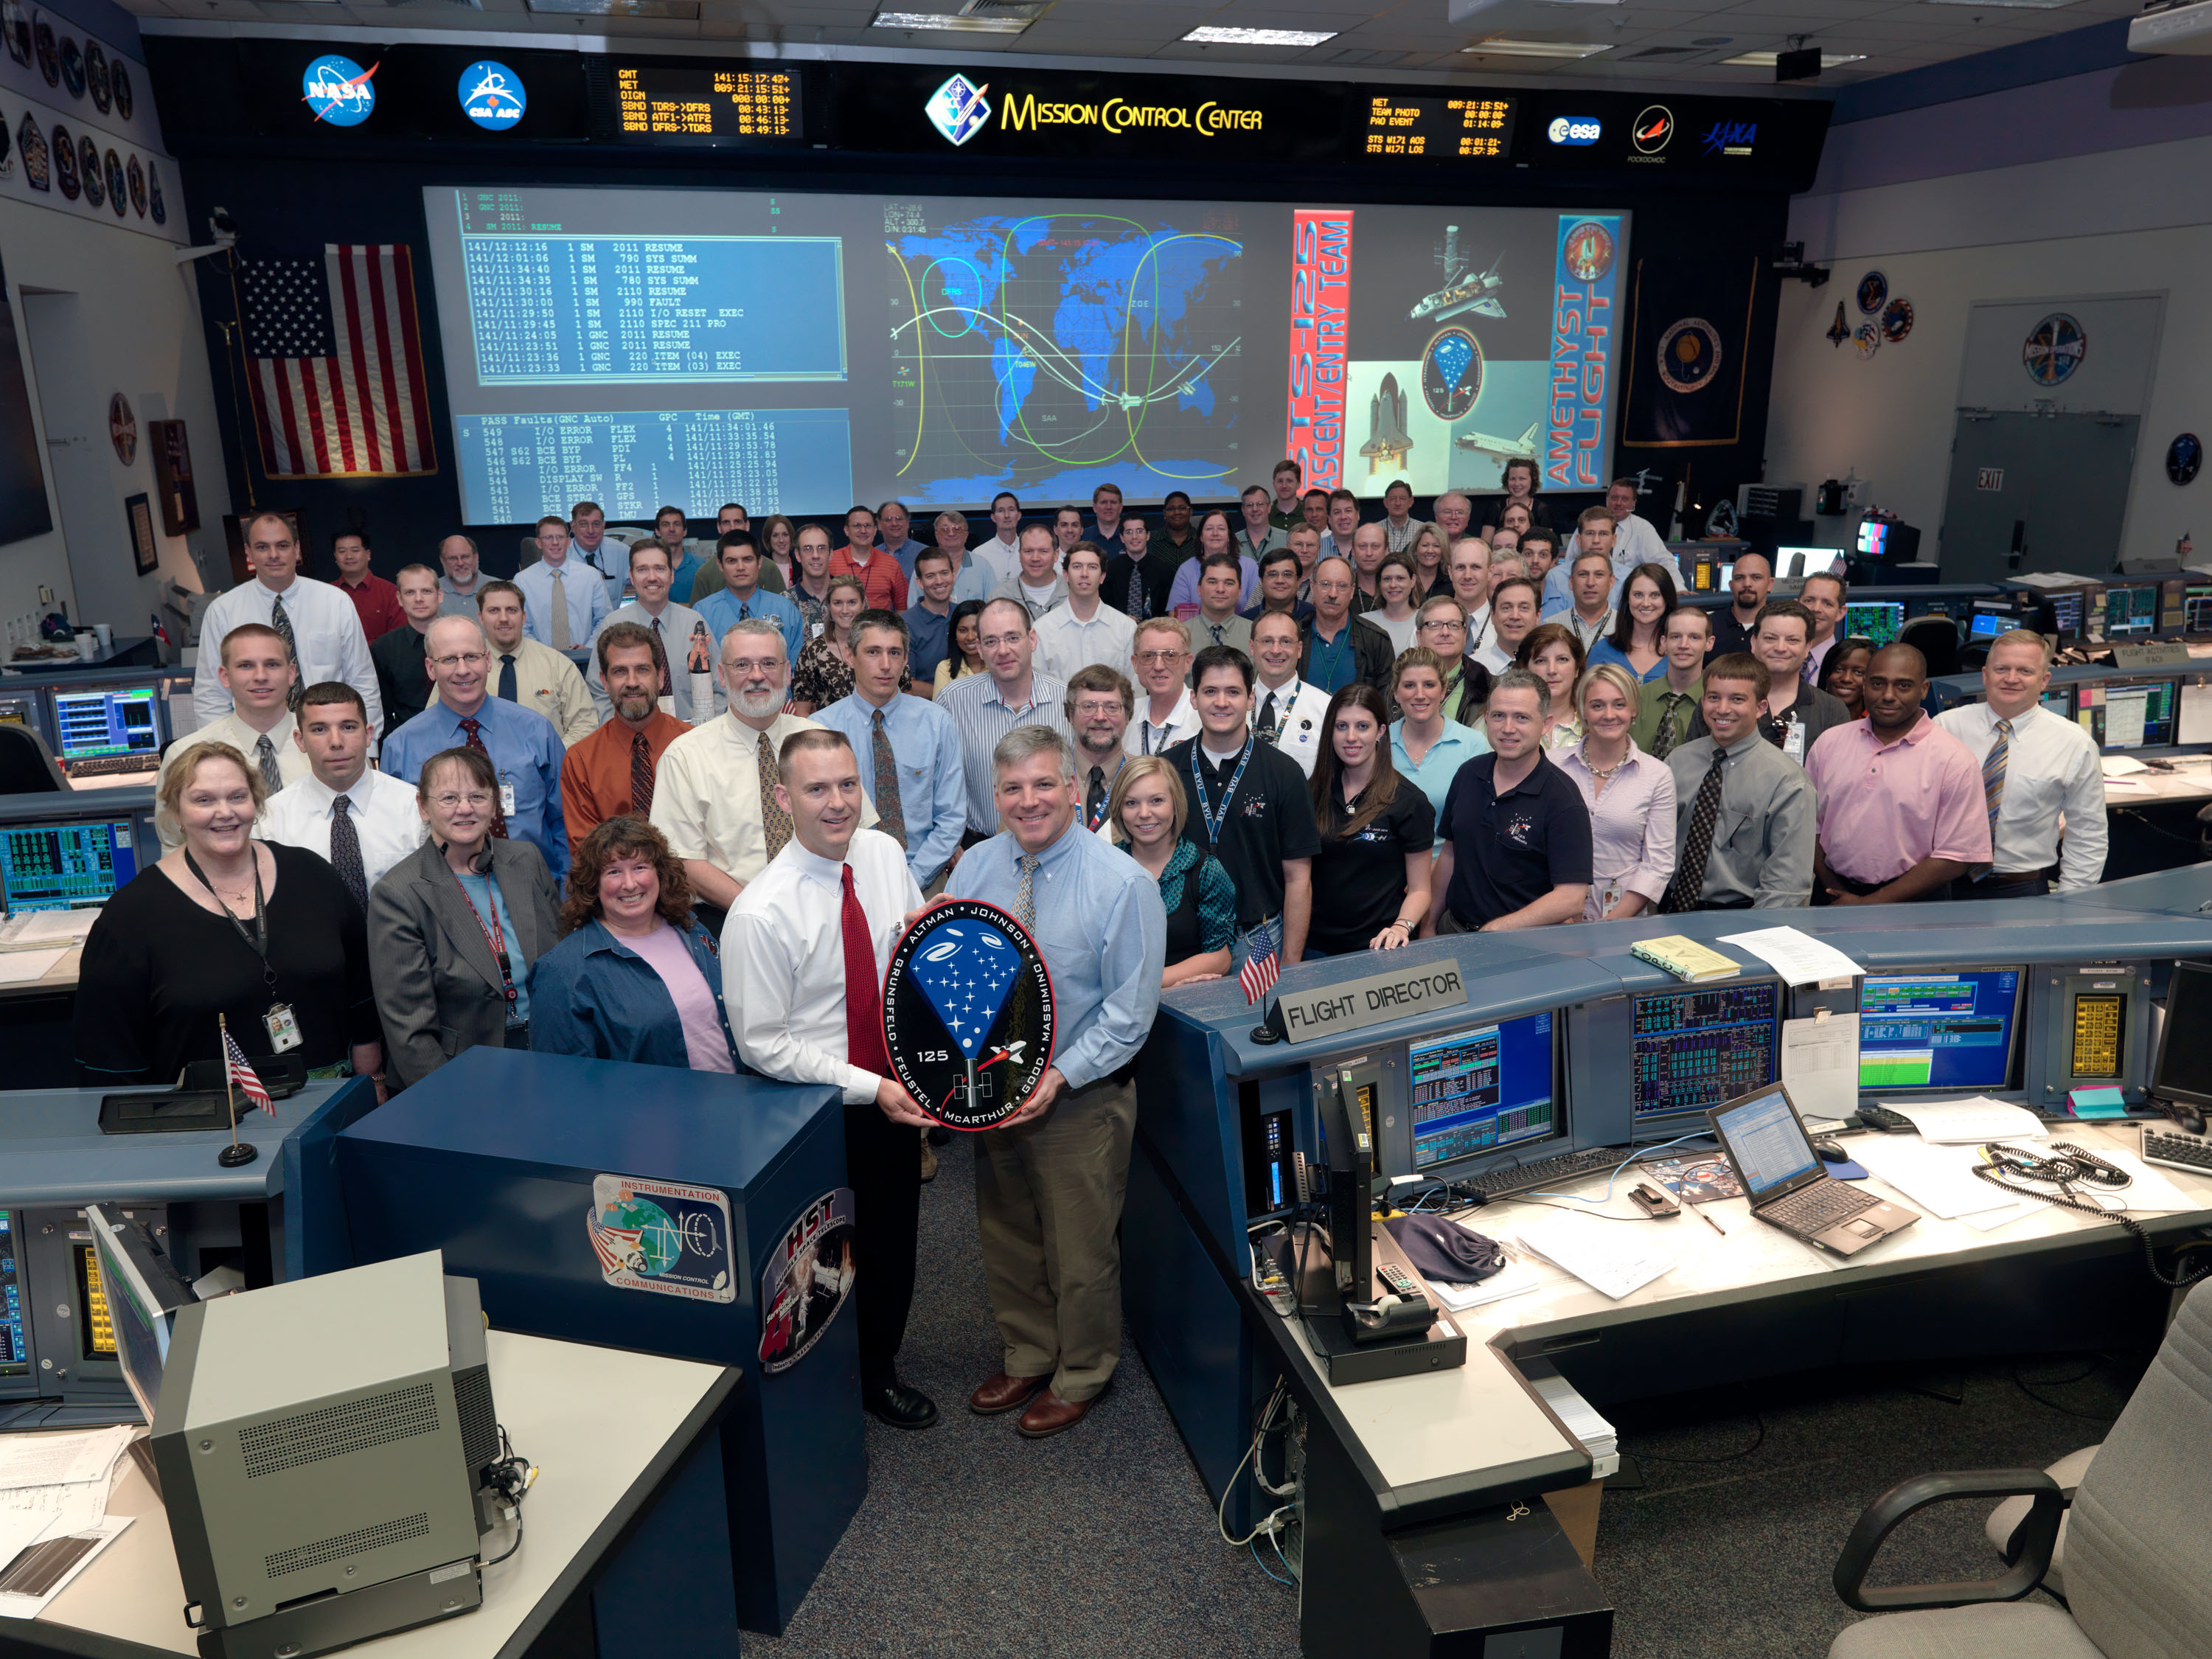 Group photo in mission control for STS-125